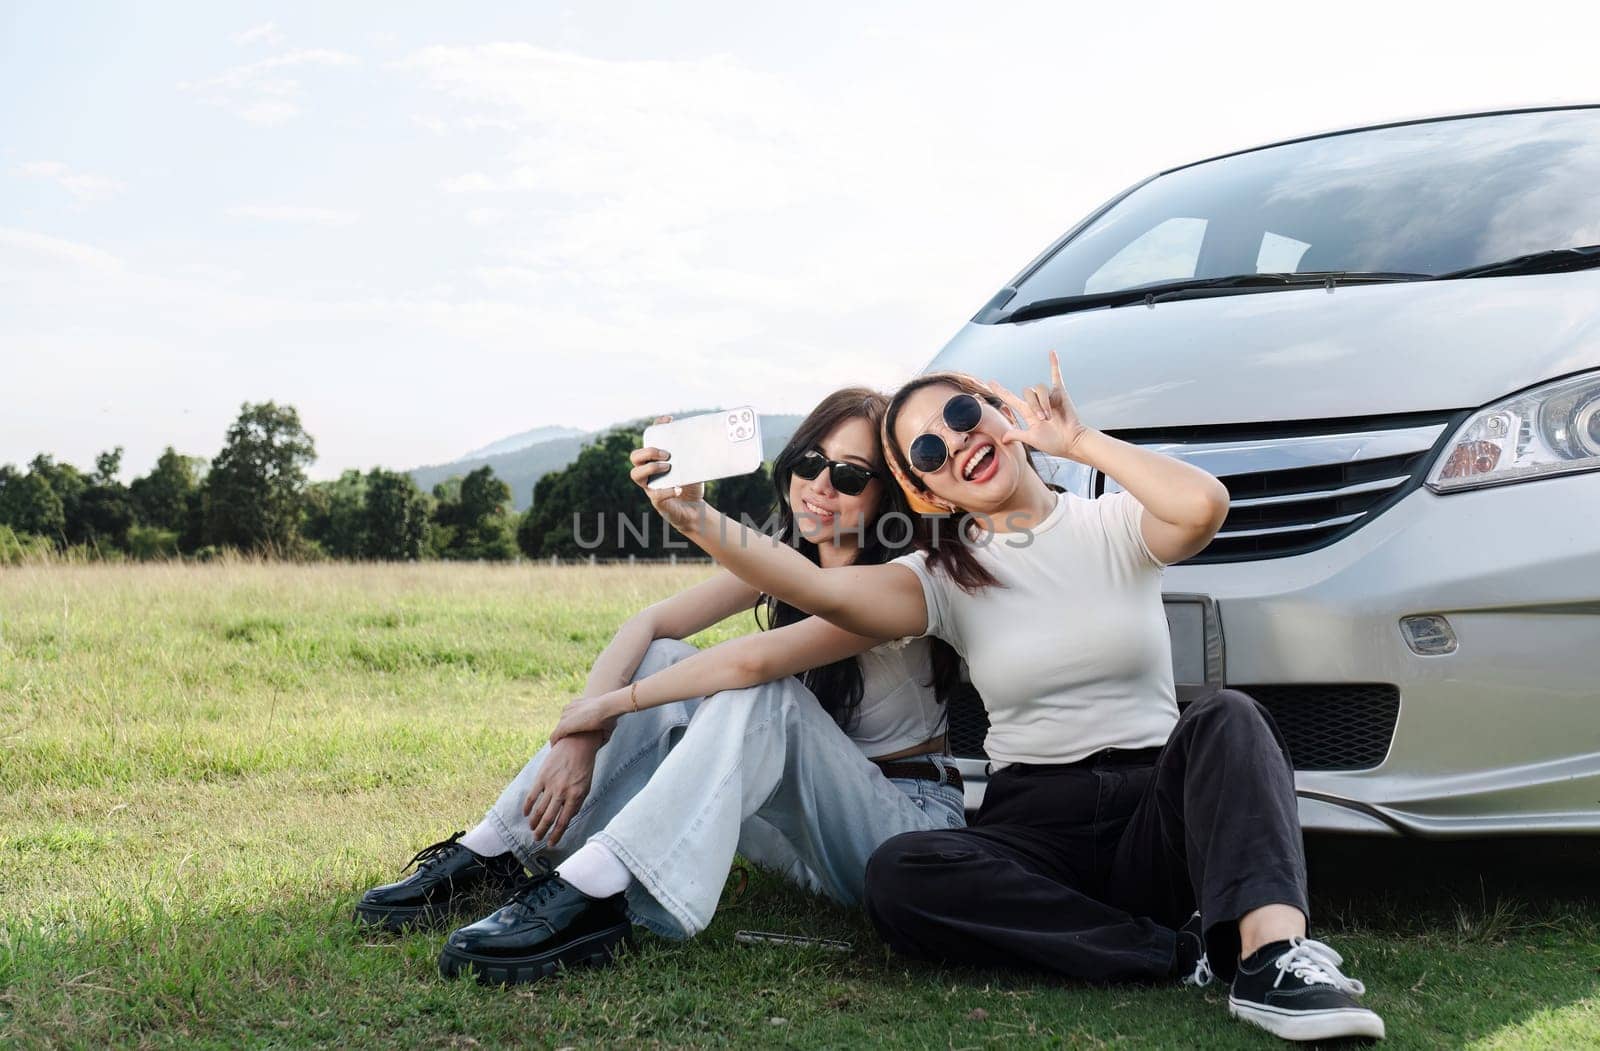 Two young women in white t-shirts and jeans sit back and relax, taking selfies together with their cell phones..